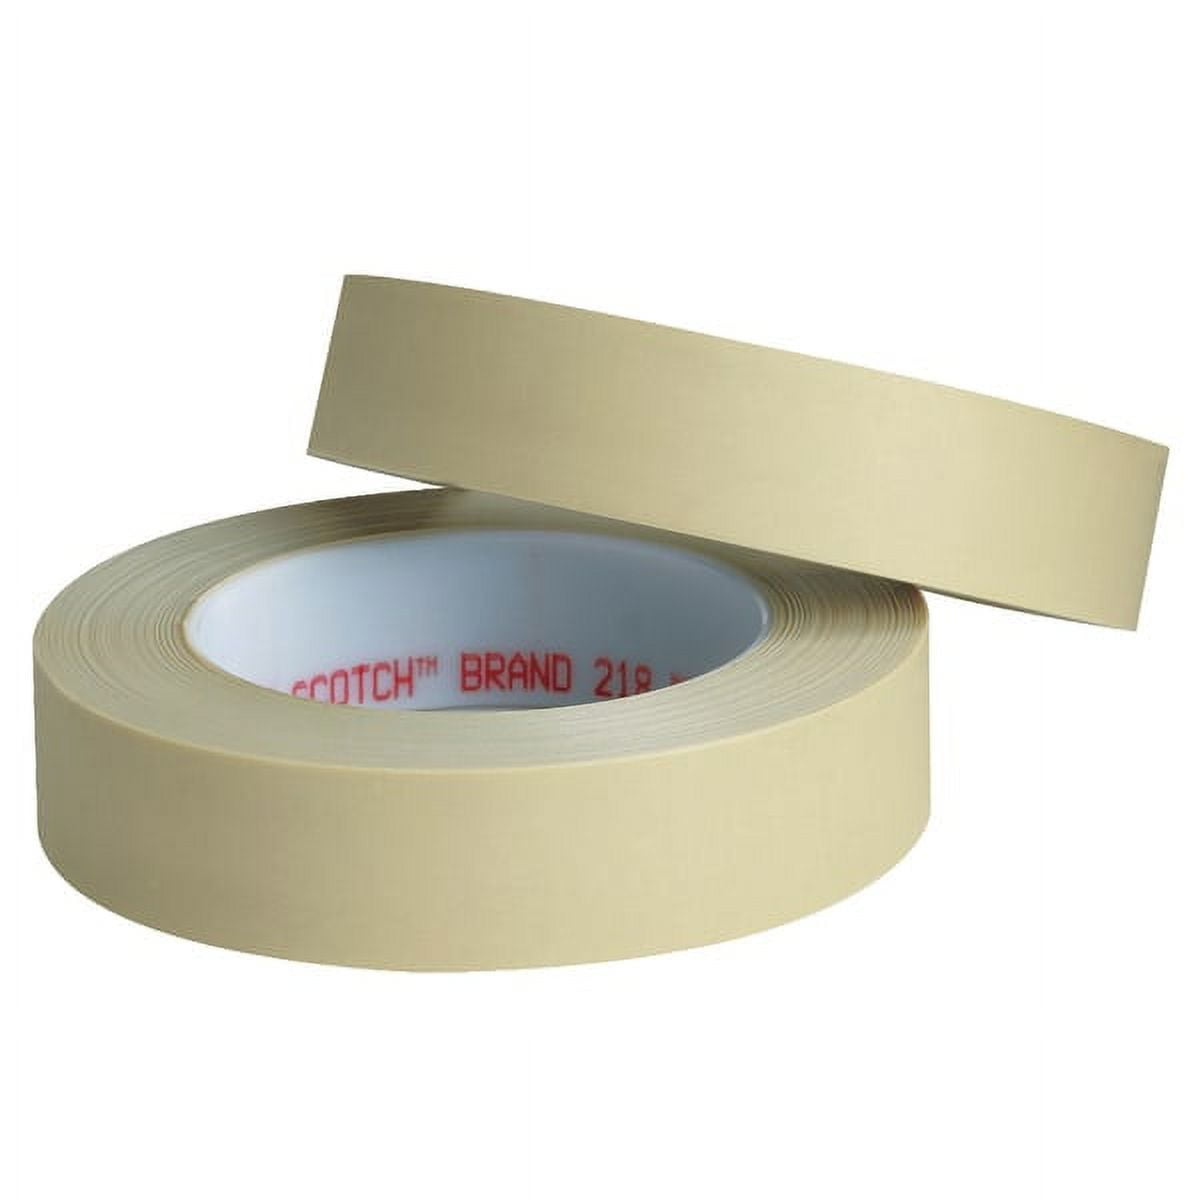 Scotch T9372183pk 2 In. X 60 Yards 218 Masking Tape, Green - Pack Of 3